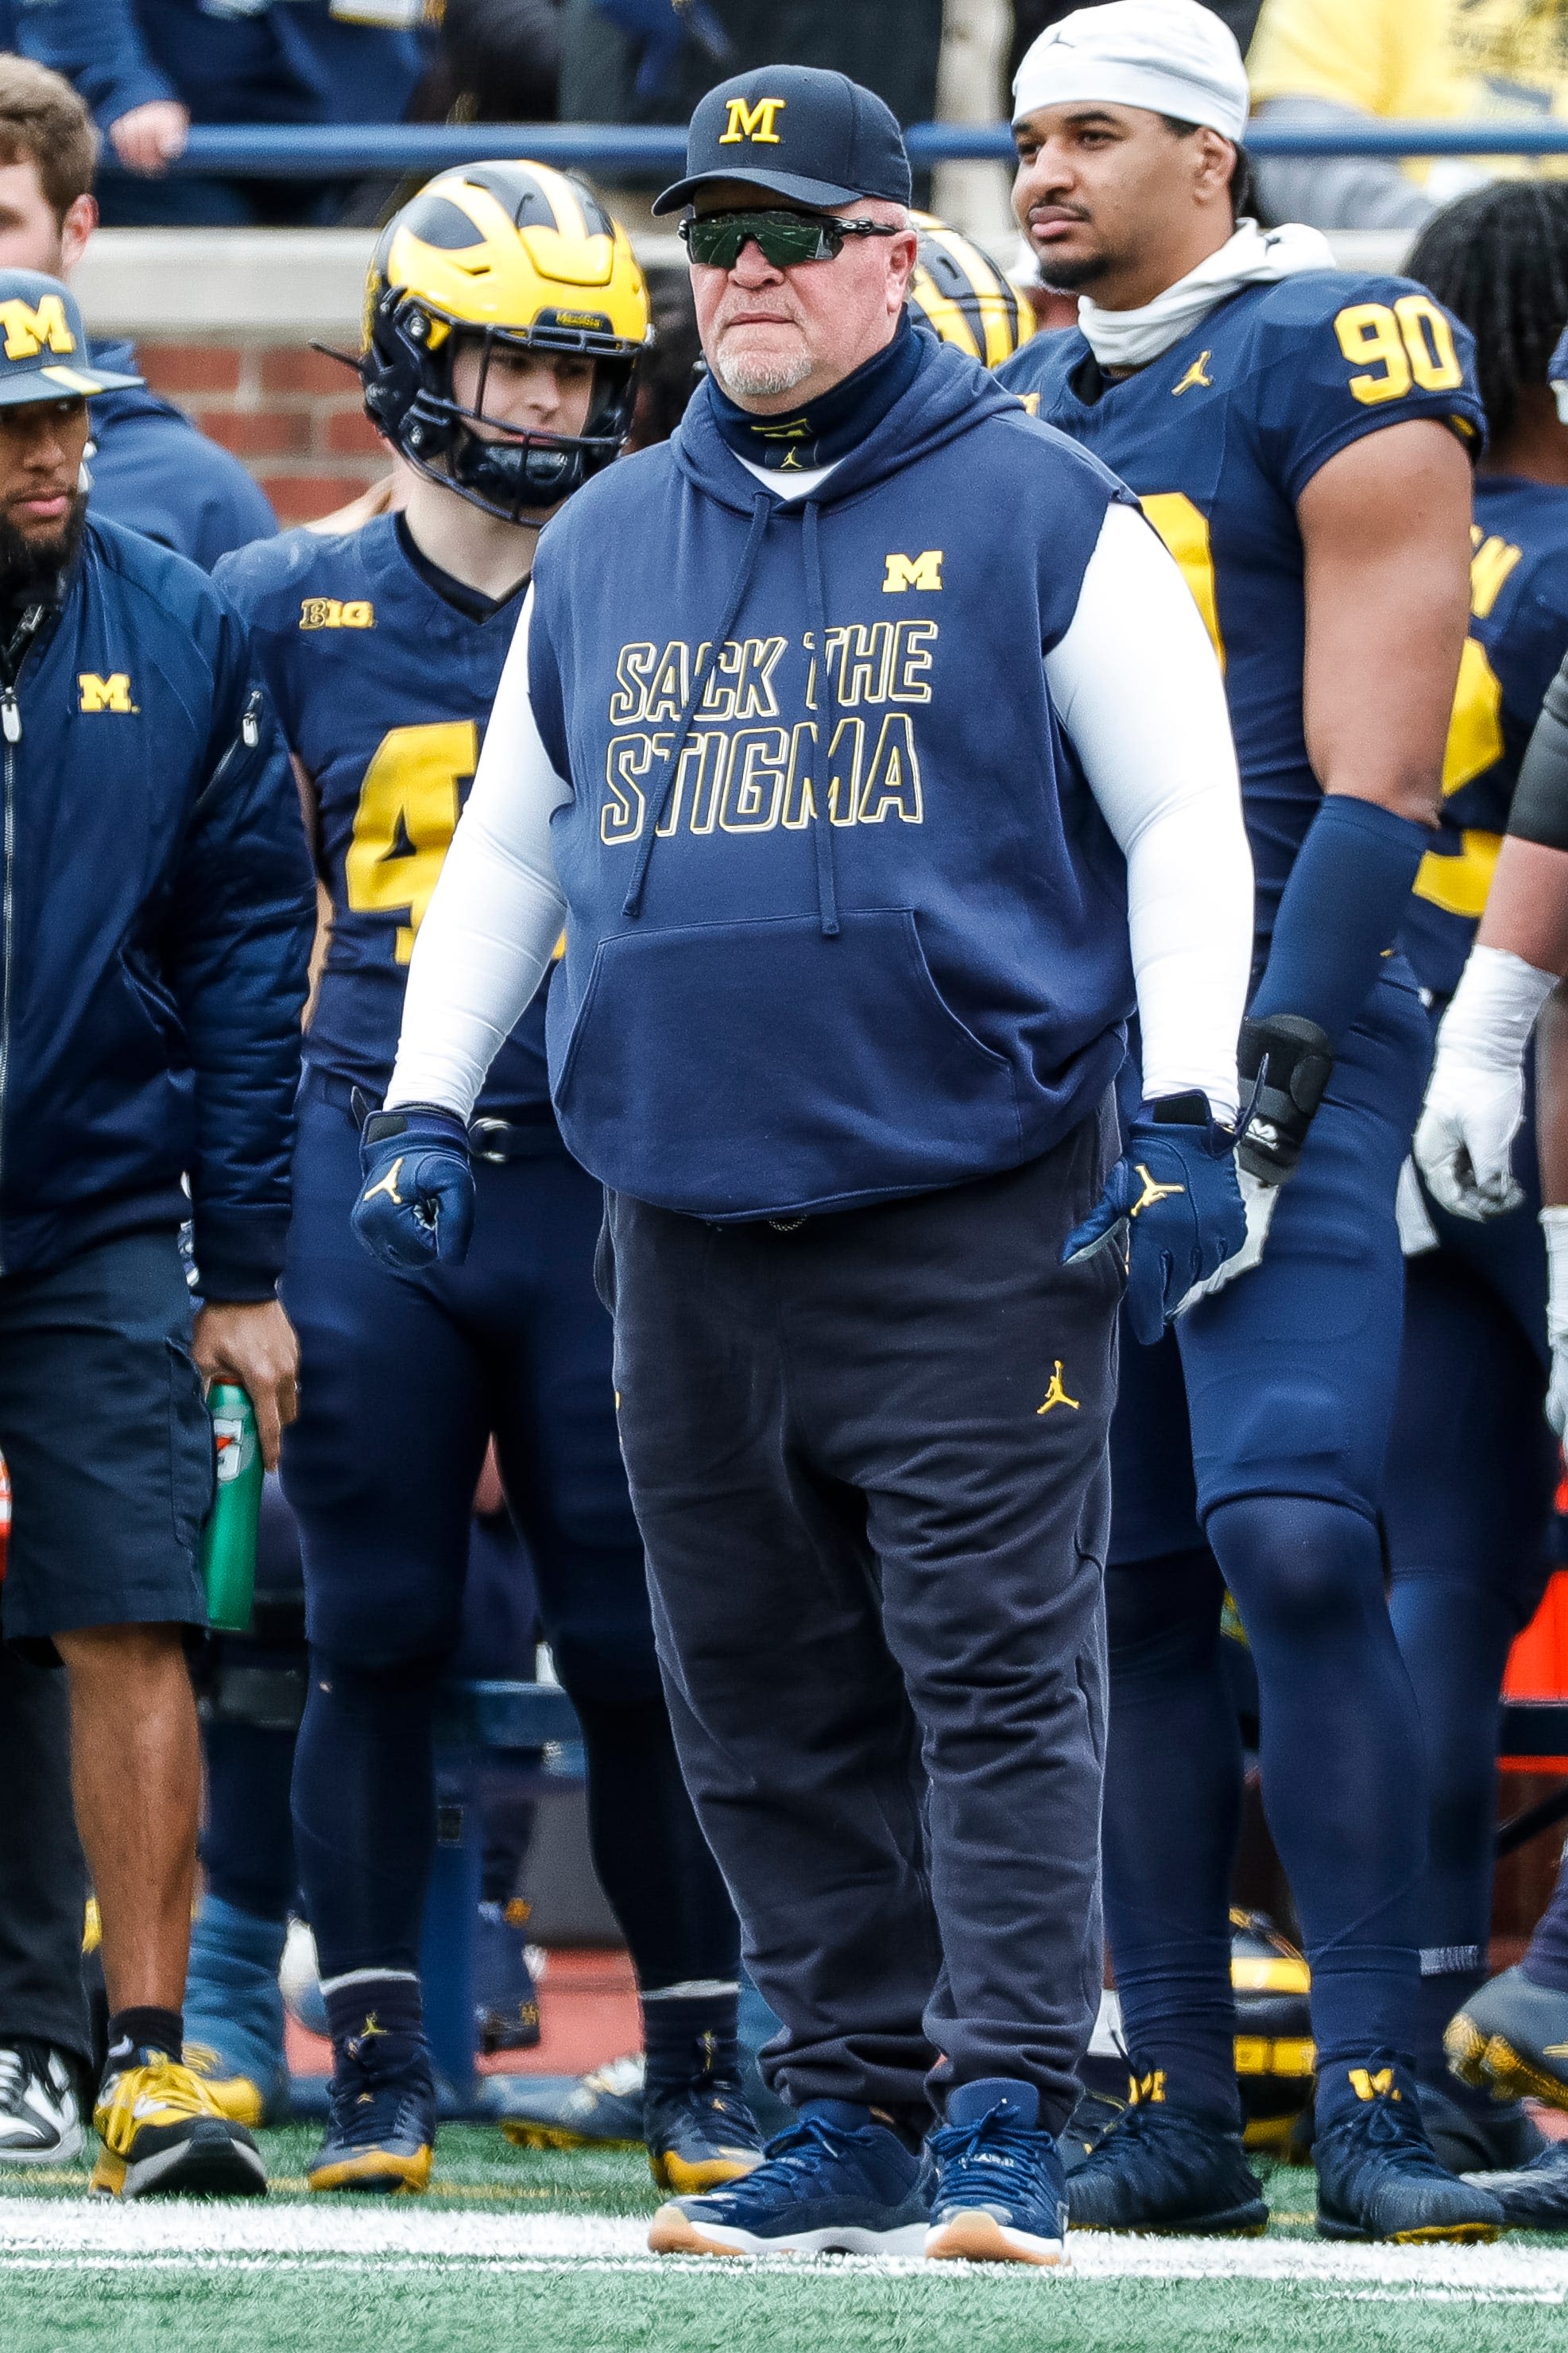 Wink Martindale likes to bring pressure. He's now feeling it as Michigan football's new DC